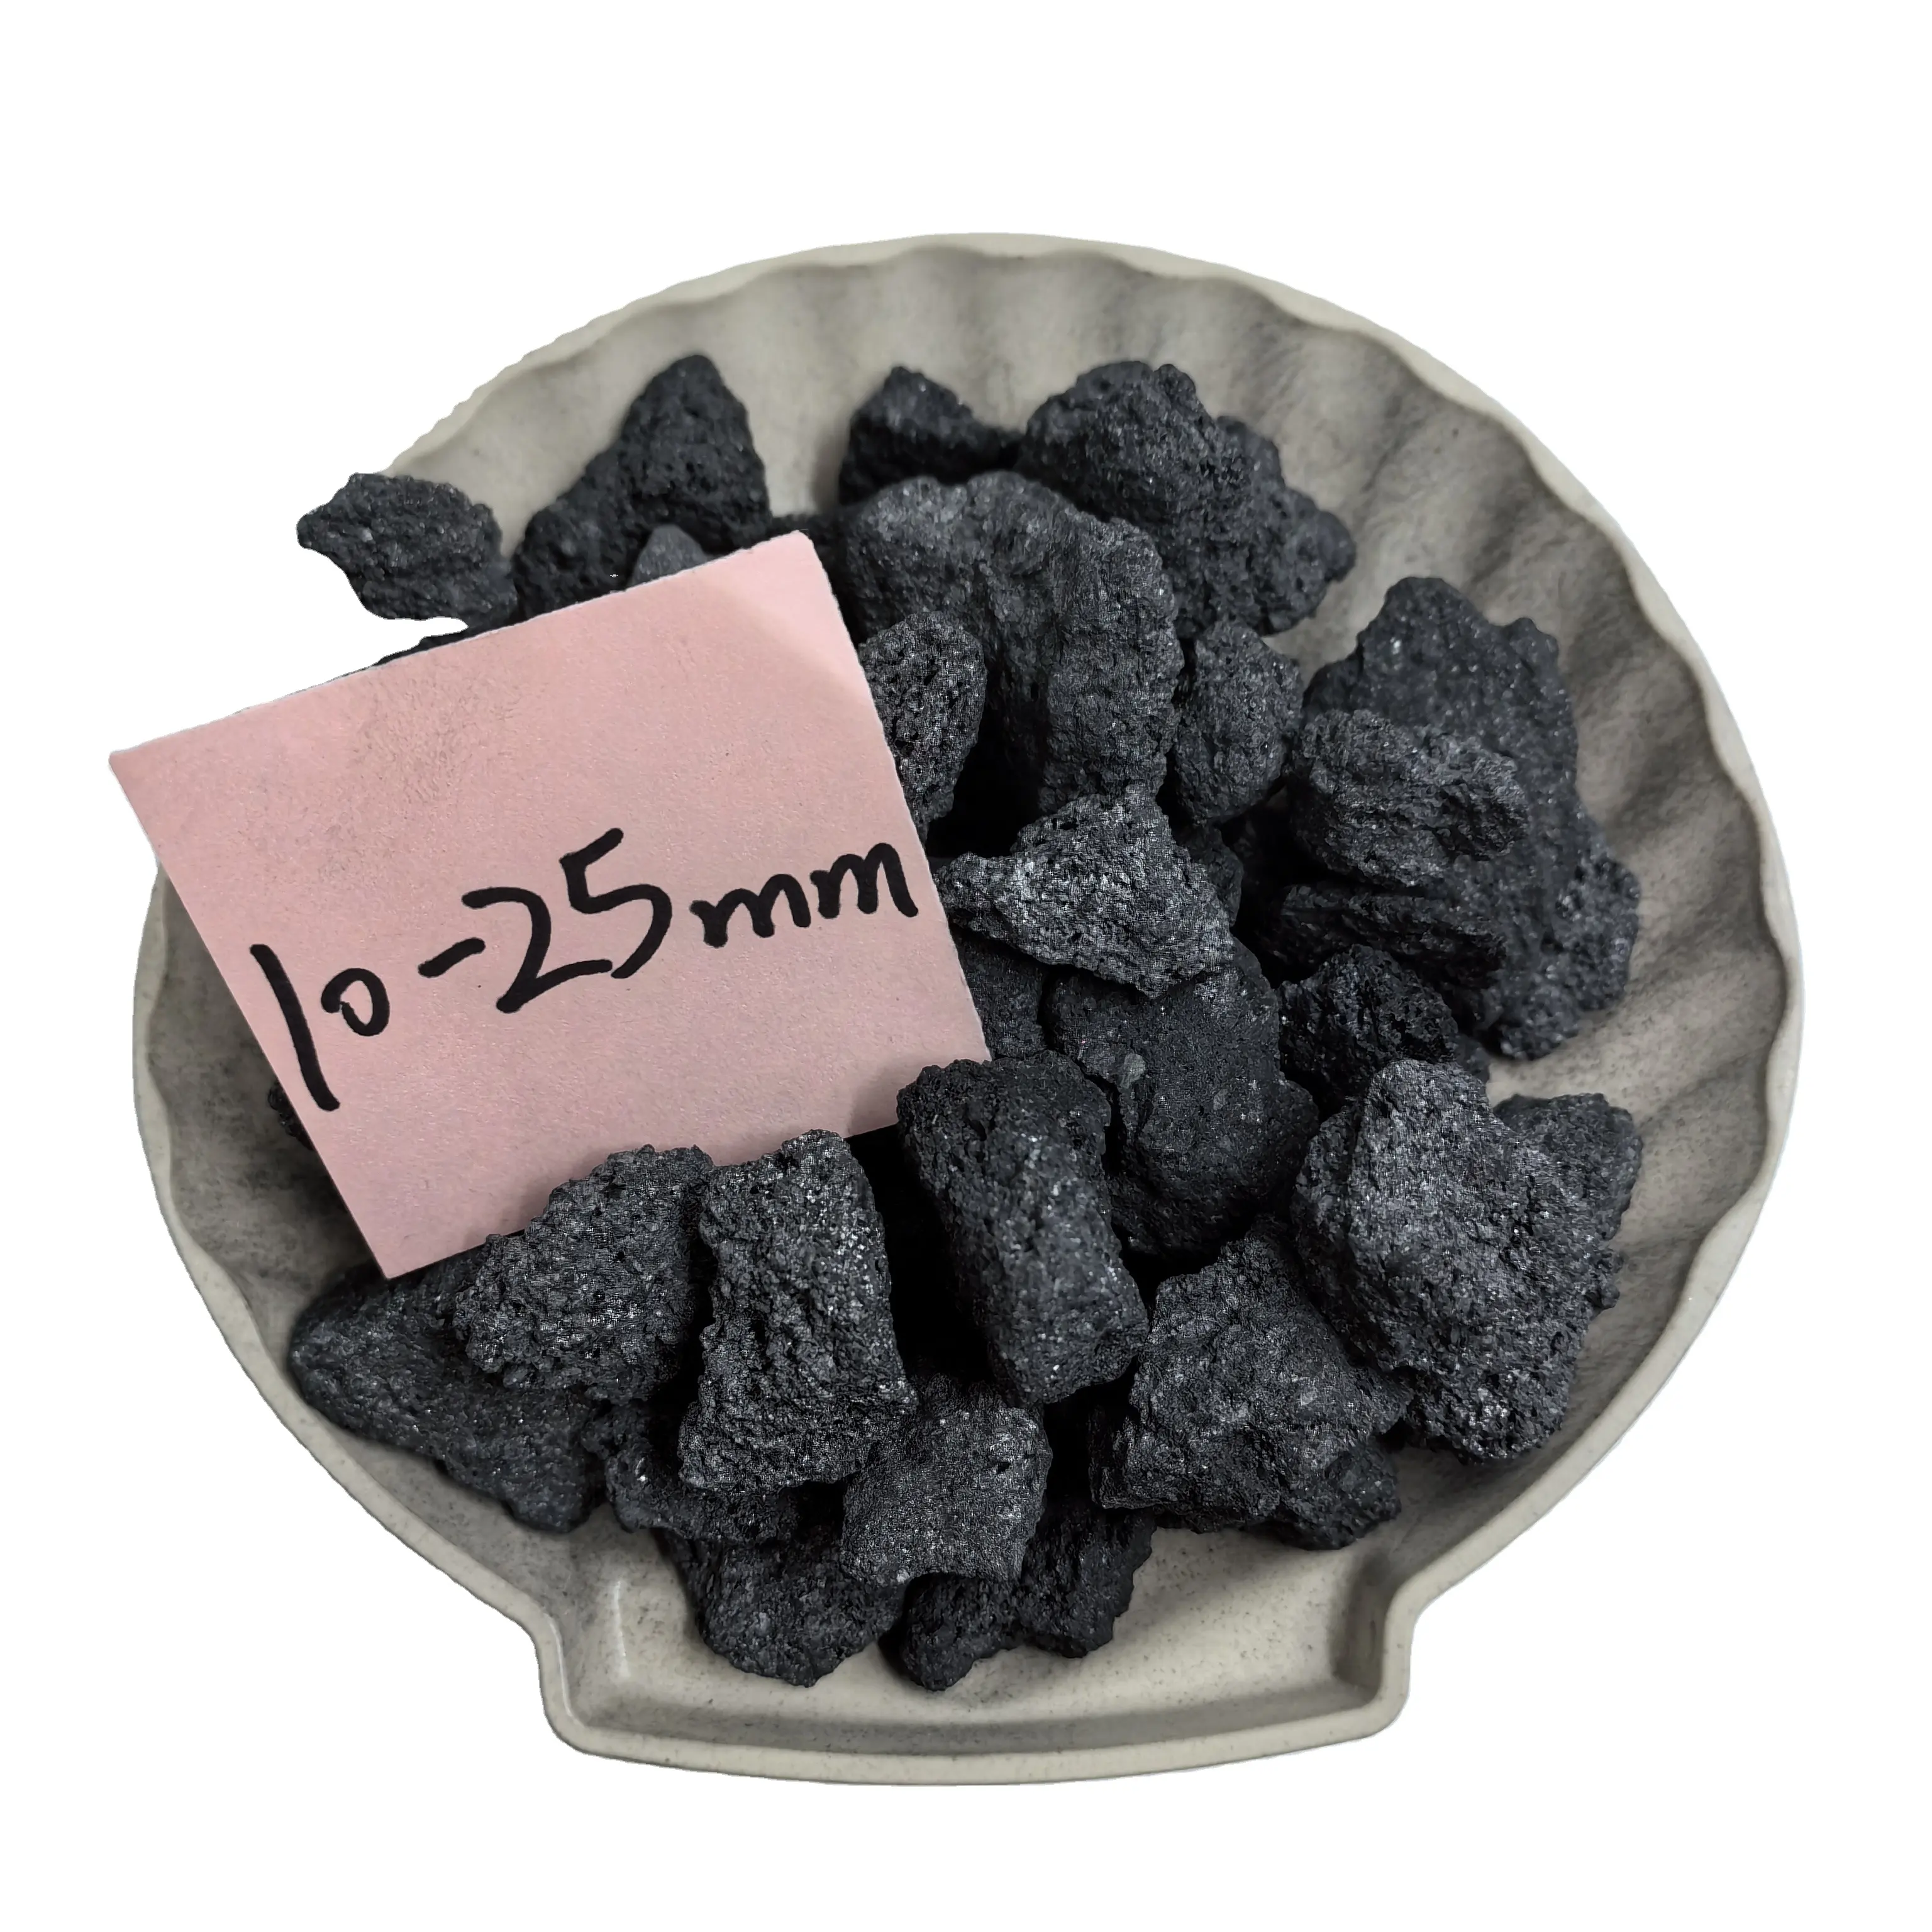 Quality sourceHot-Selling Low-Sulfur Coke From China Metallurgical Coke 10-25mm